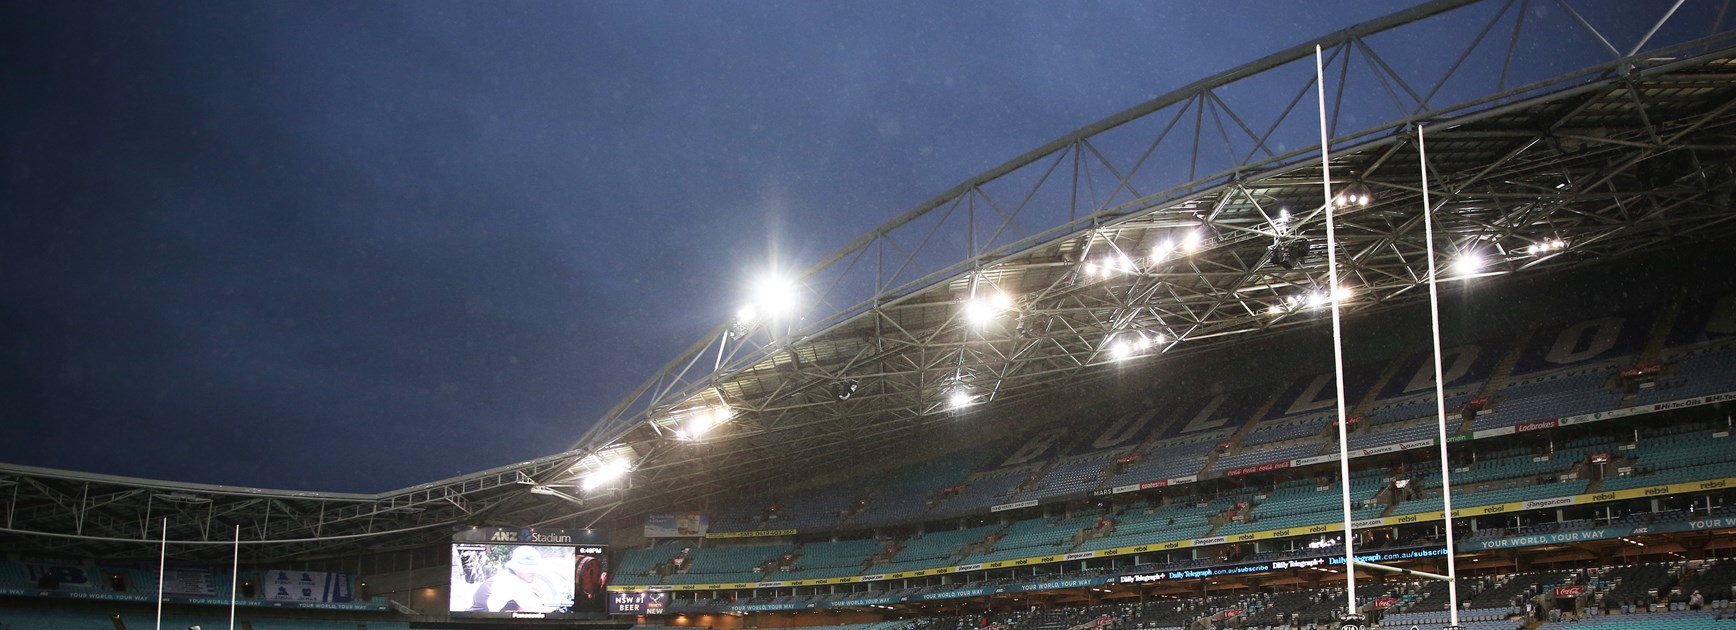 Fans First for ANZ Stadium Matches in 2018